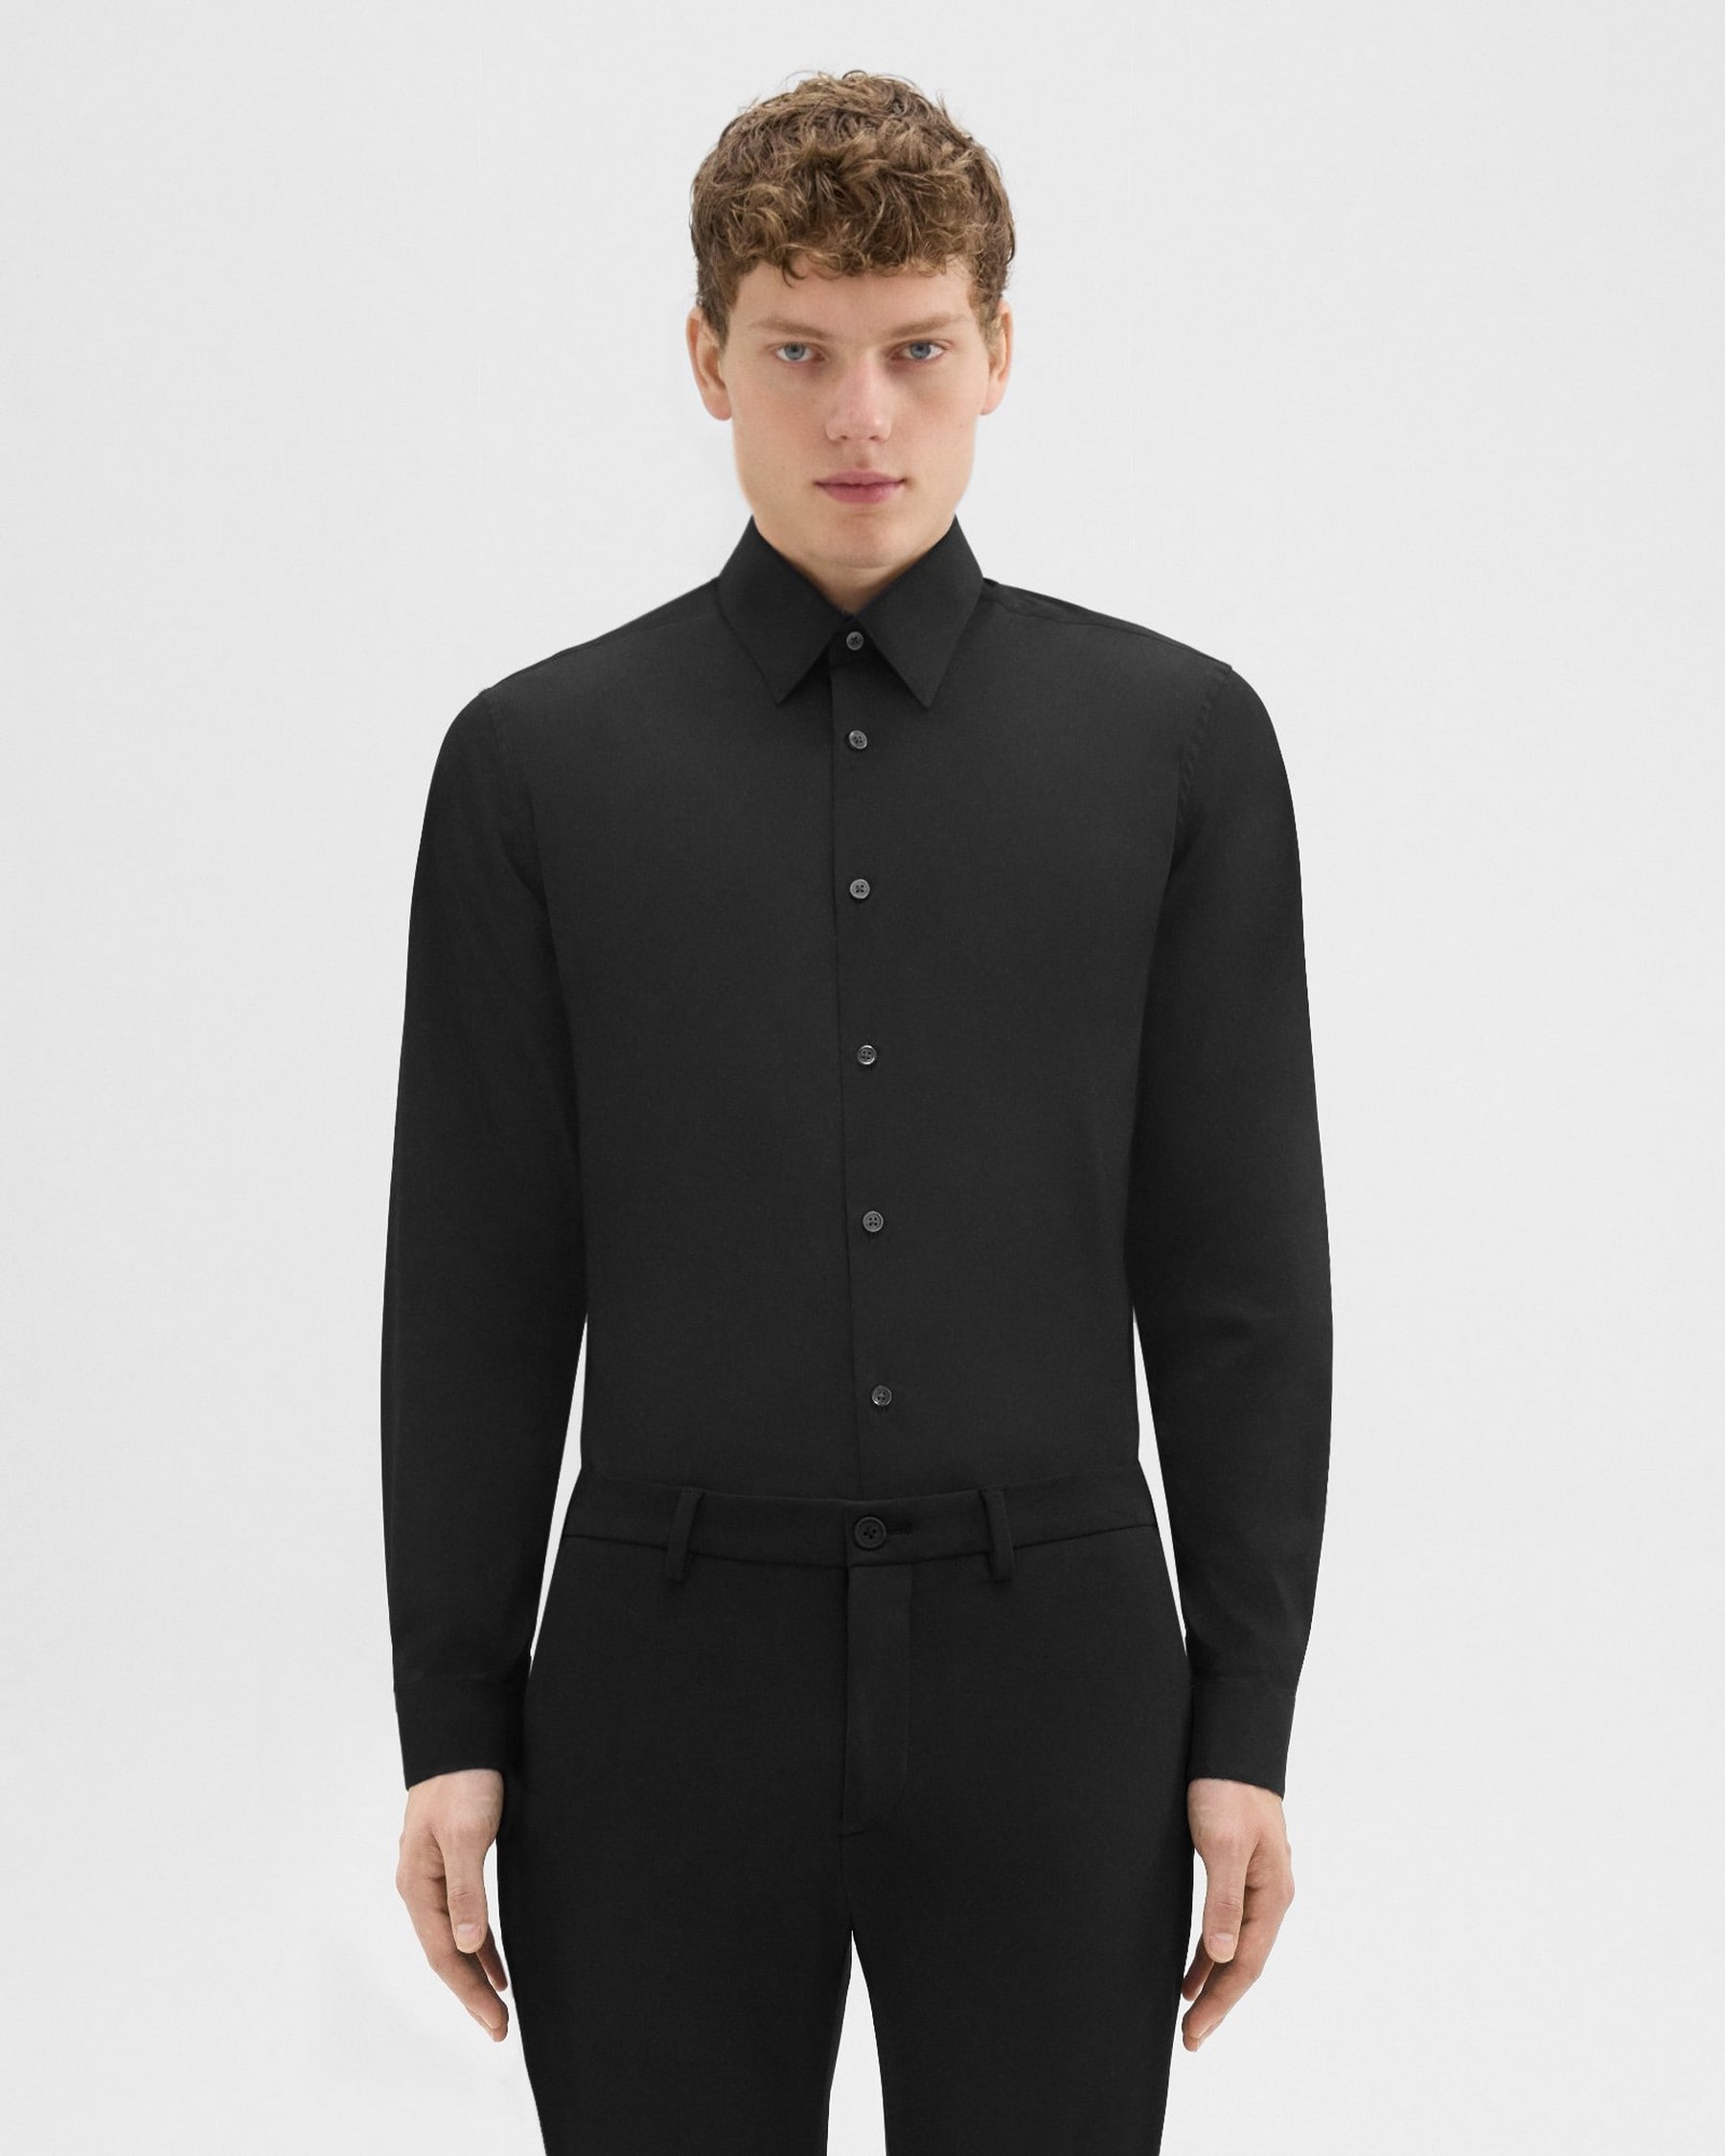 Theory Sylvain Shirt in Good Cotton